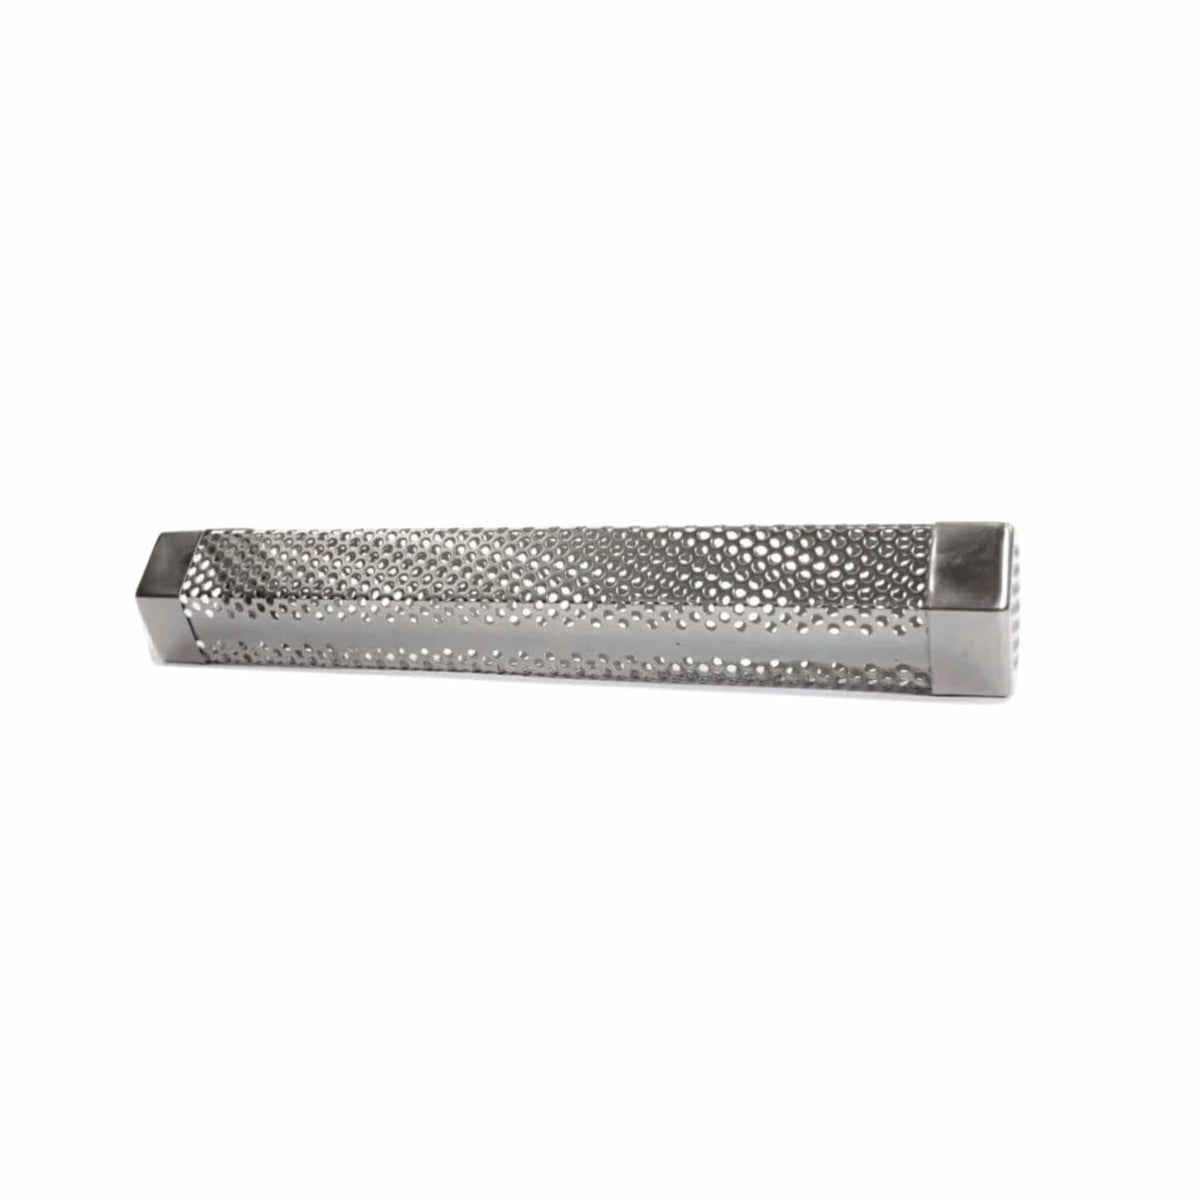 Coyote Smoker Tube for Pellet Grill